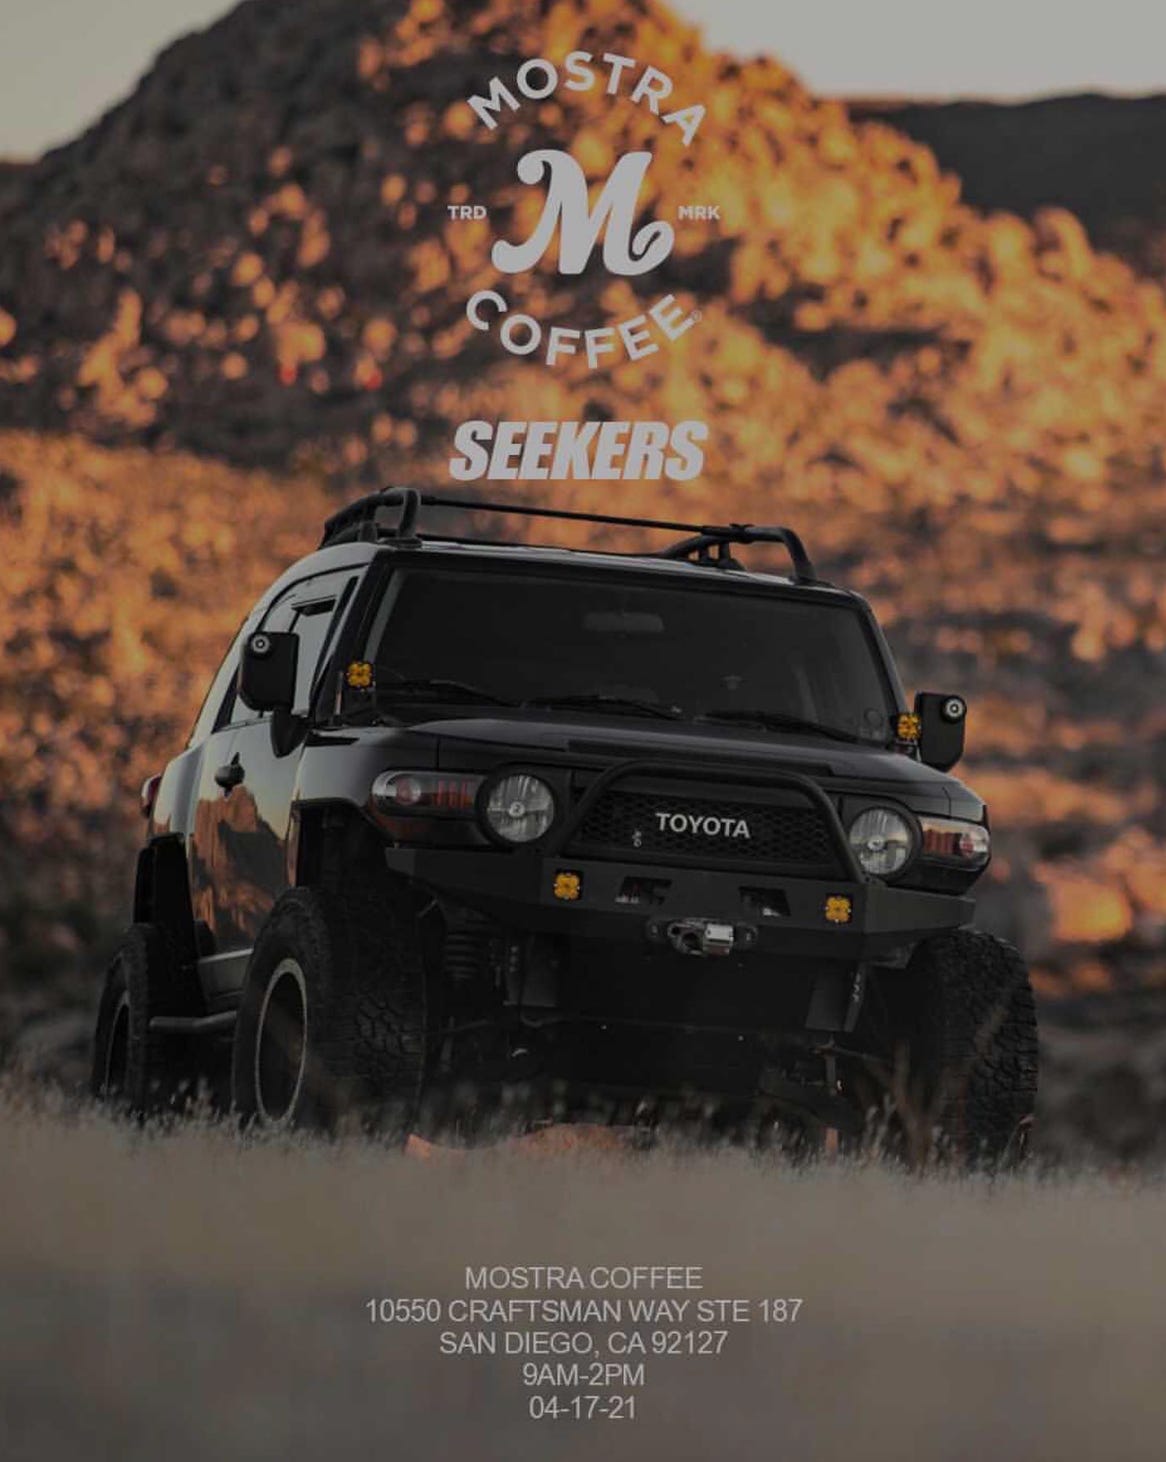 A Toyota SUV in front of a rocky mountain advertising Mostra Coffee's Seekers Coffee and Explore event on April 17th, 2021.